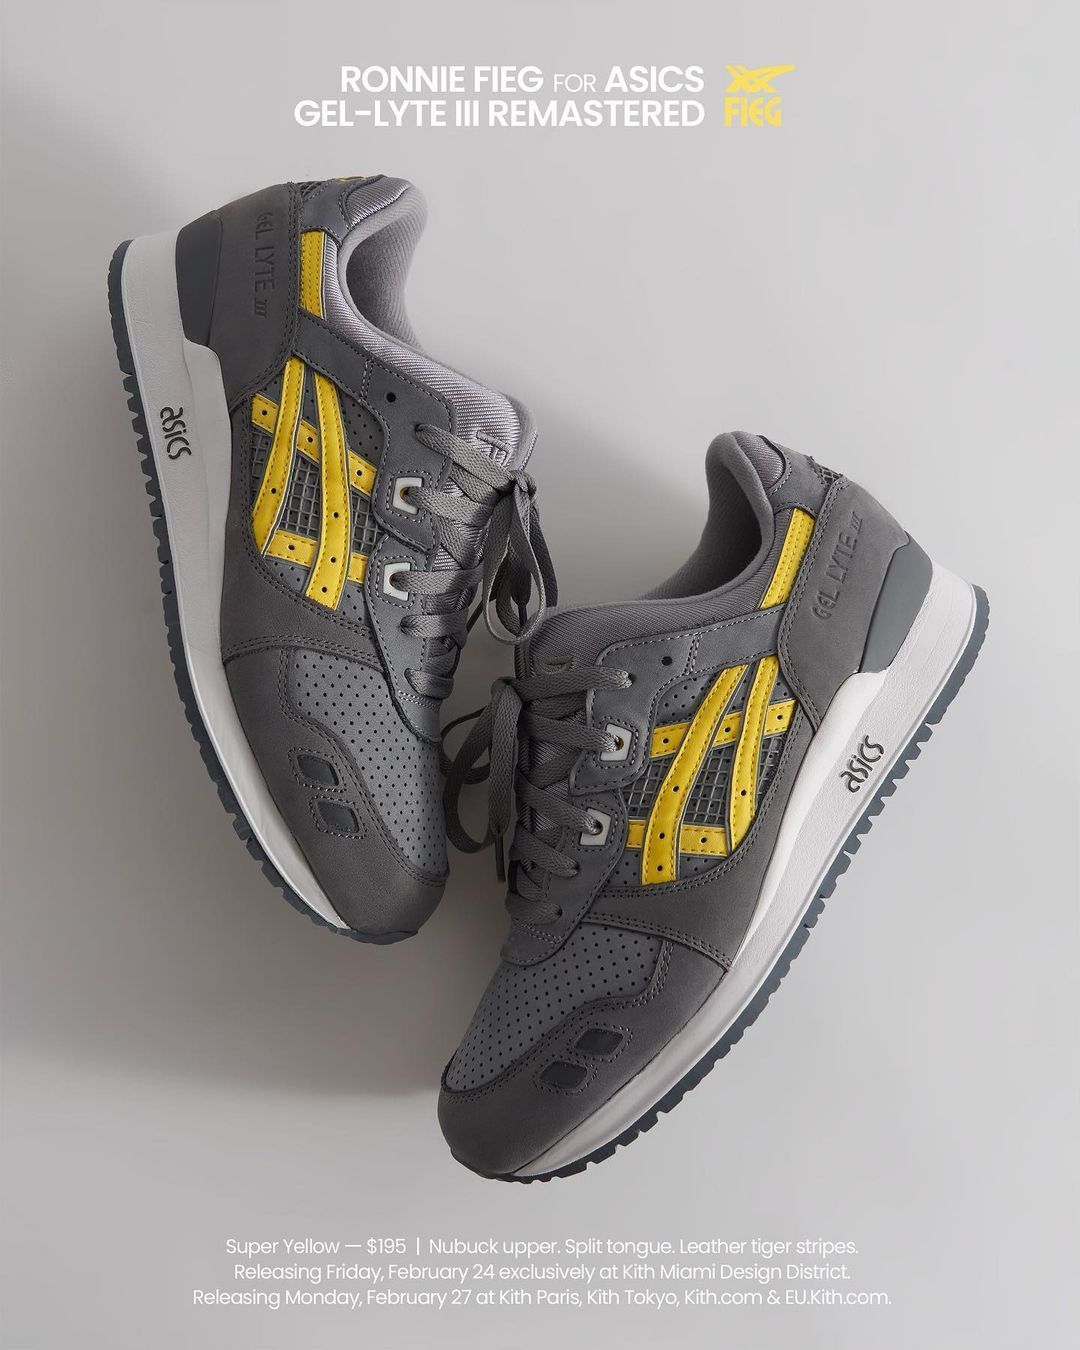 Kith Ronnie Fieg for ASICS GEL-LYTE III Remastered - Super Yellow